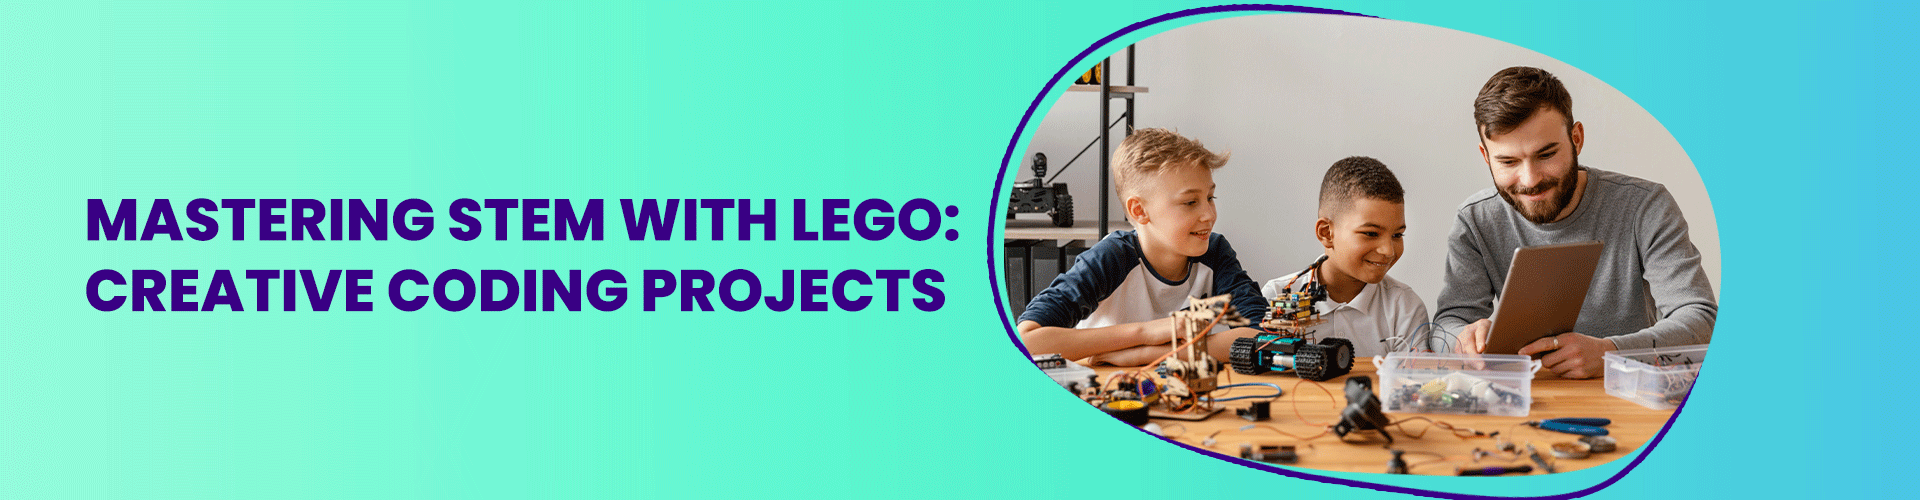 Mastering STEM with LEGO: Creative Coding Projects